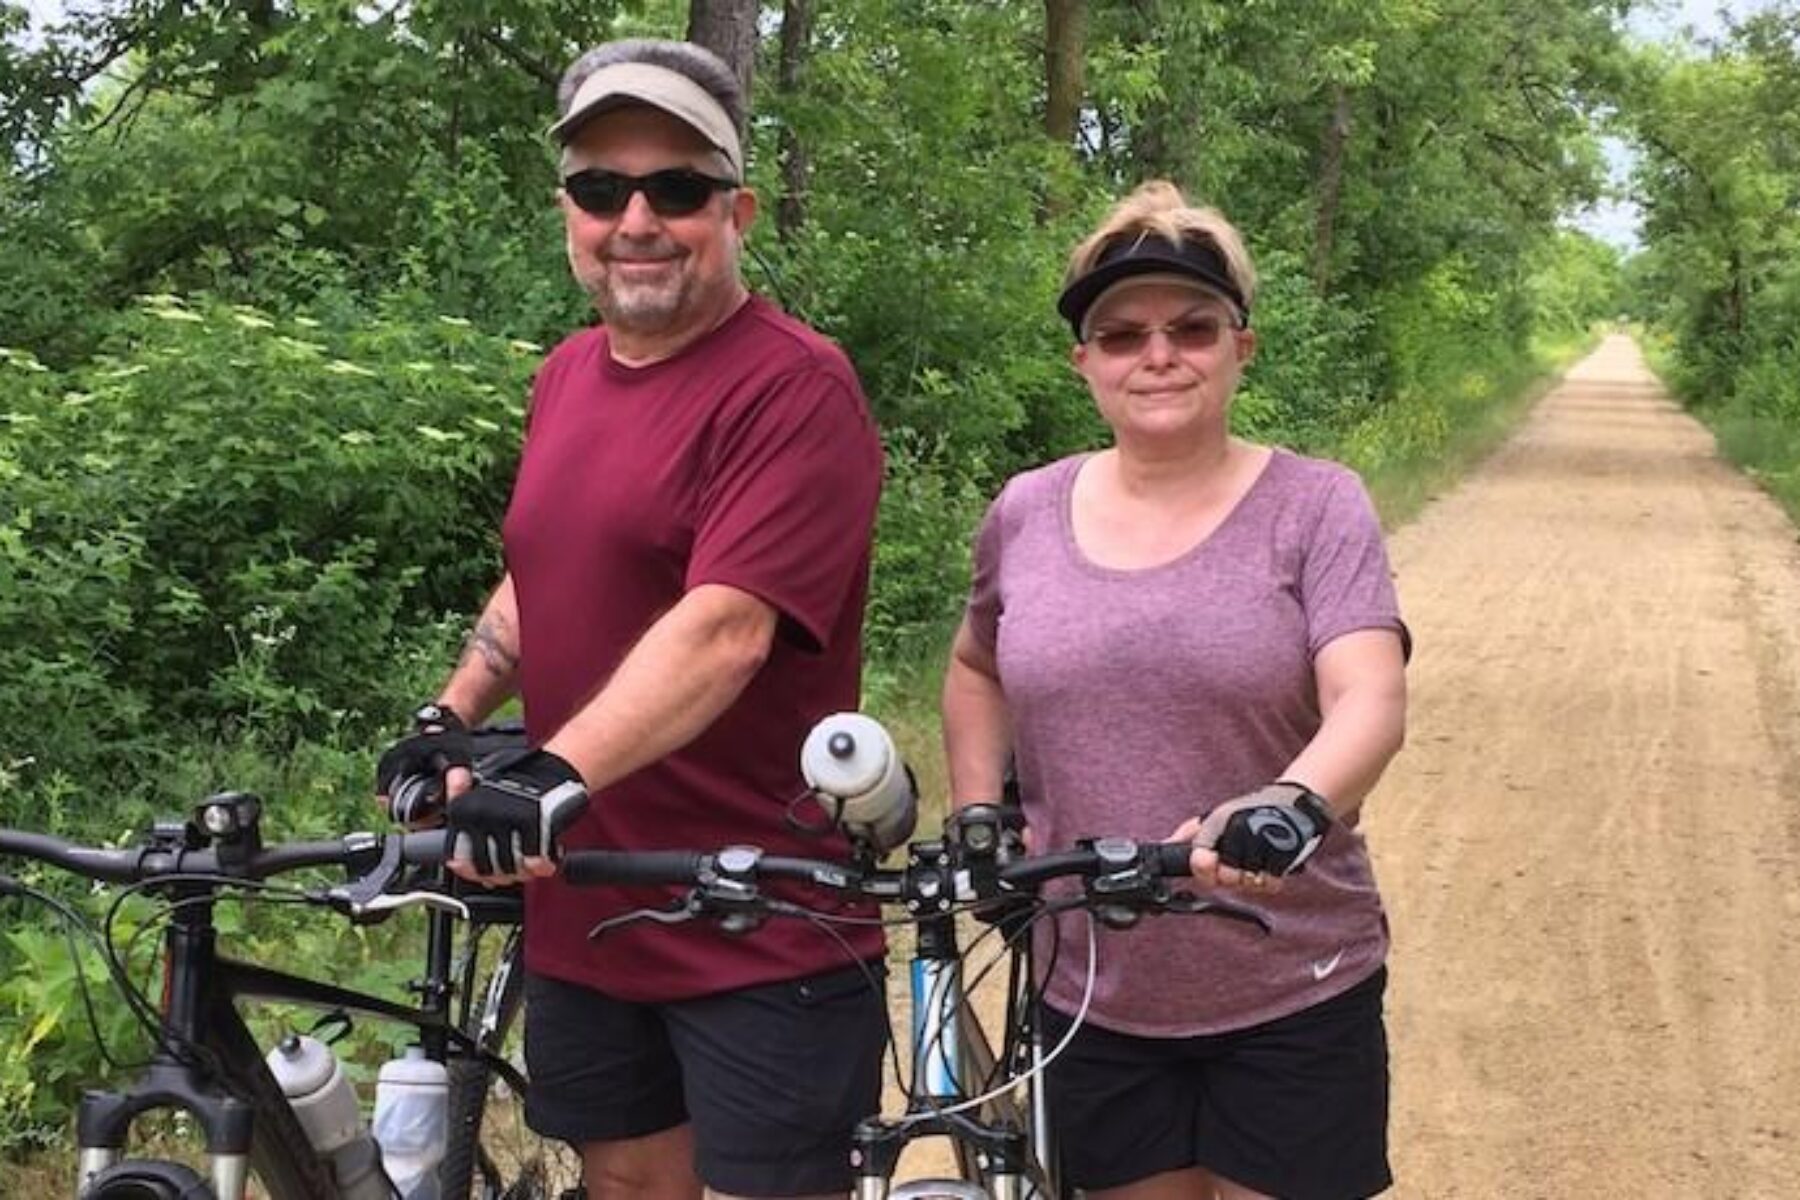 Bryan and June Bradley, members of Rails-to-Trails Conservancy since 1999 | Photo courtesy Bryan and June Bradley